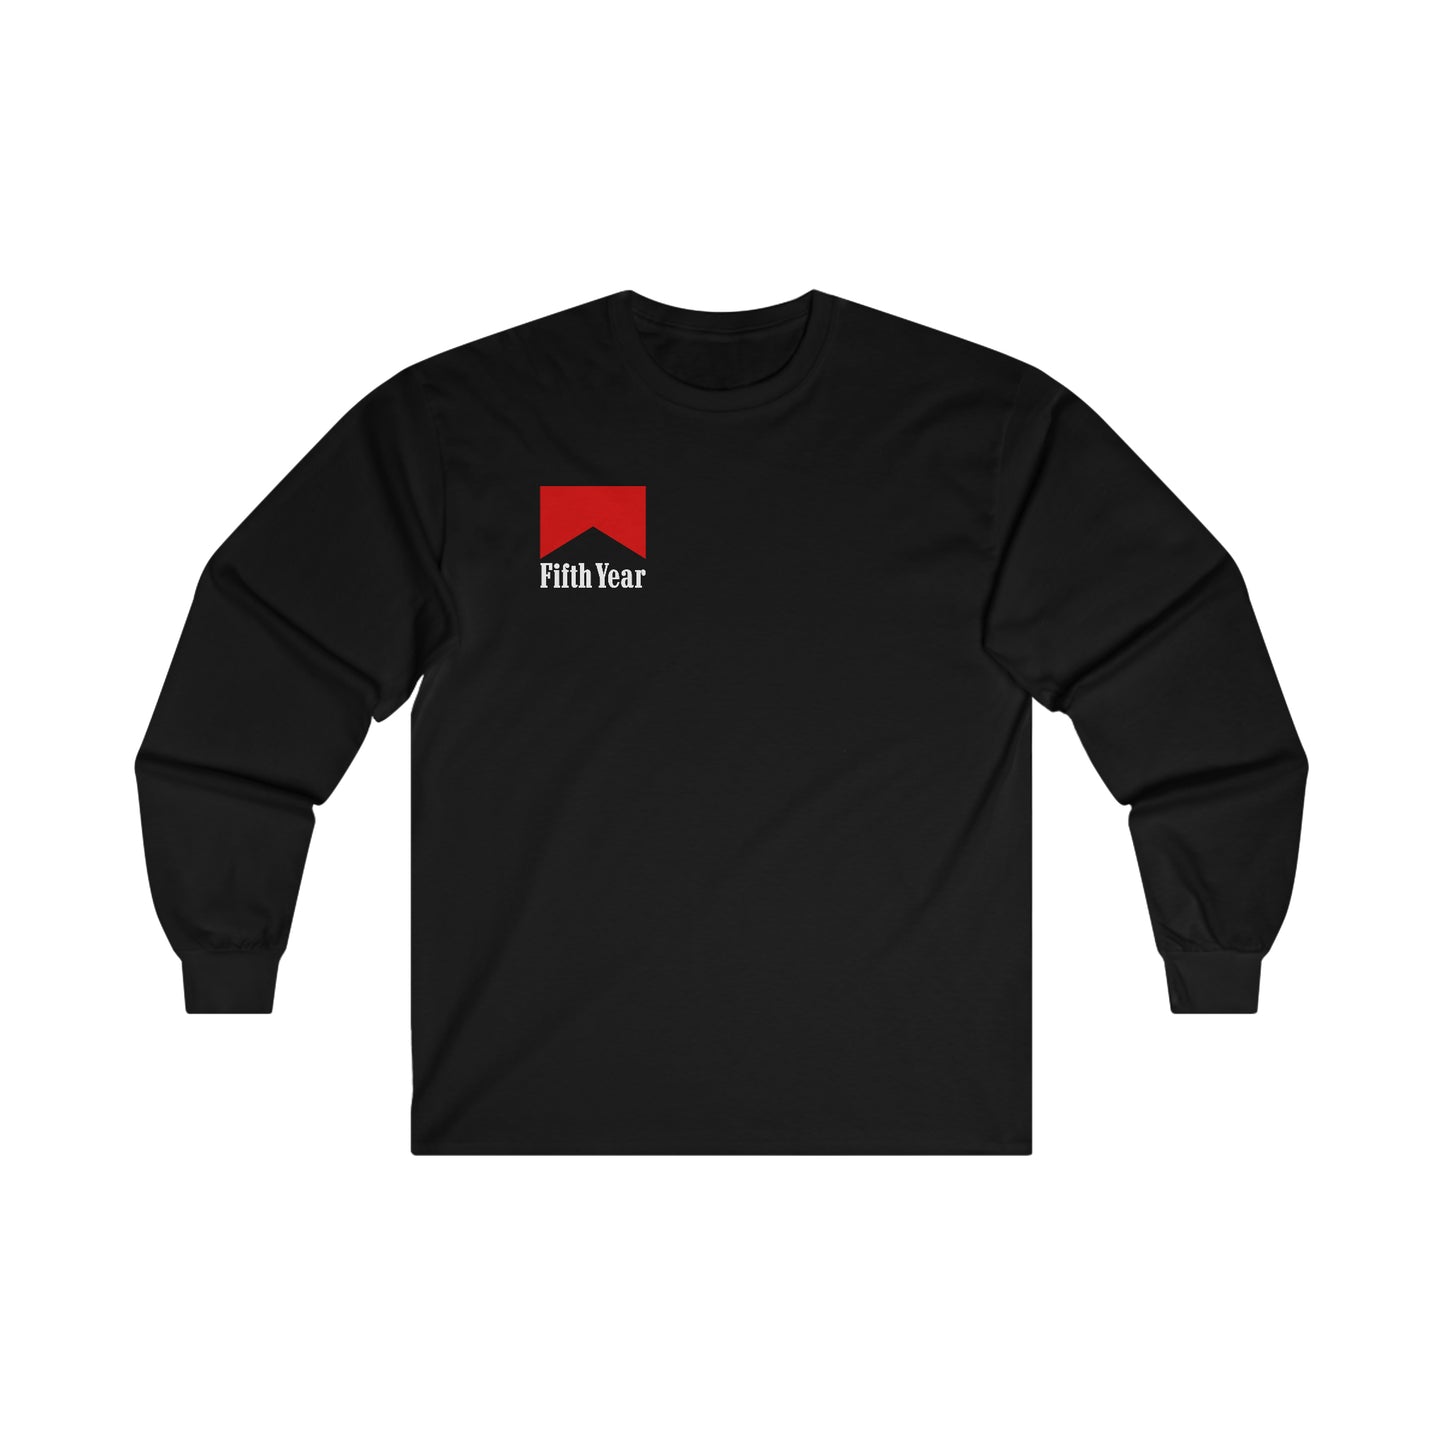 Fifth Year Cigarettes - Ultra Cotton Long Sleeve Tee